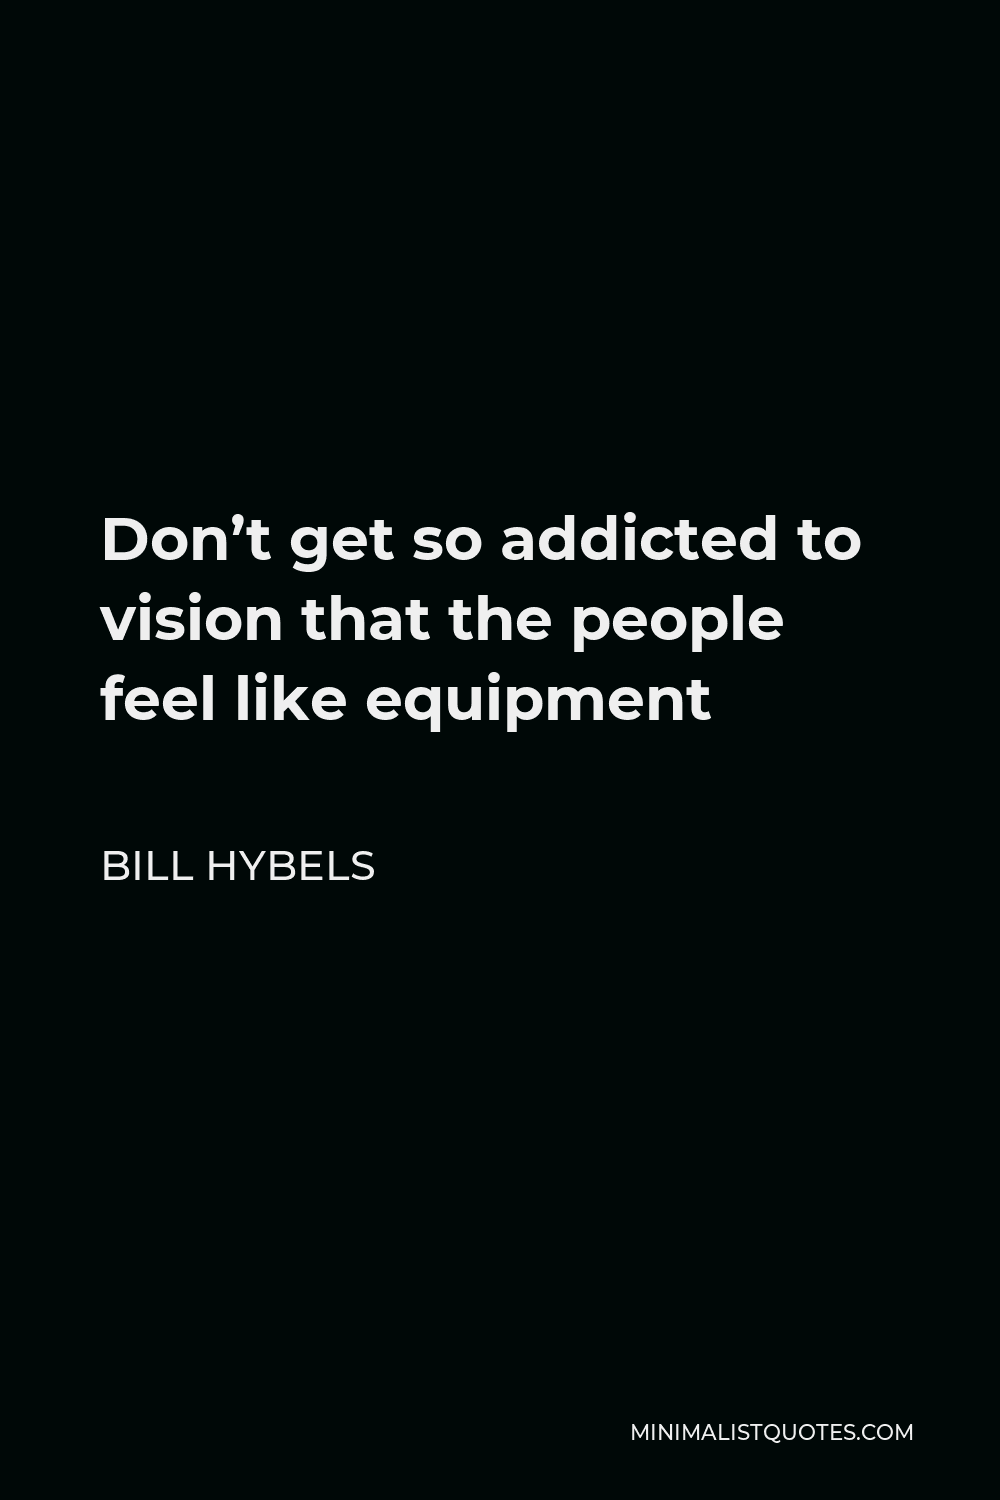 Bill Hybels Quote - Don’t get so addicted to vision that the people feel like equipment